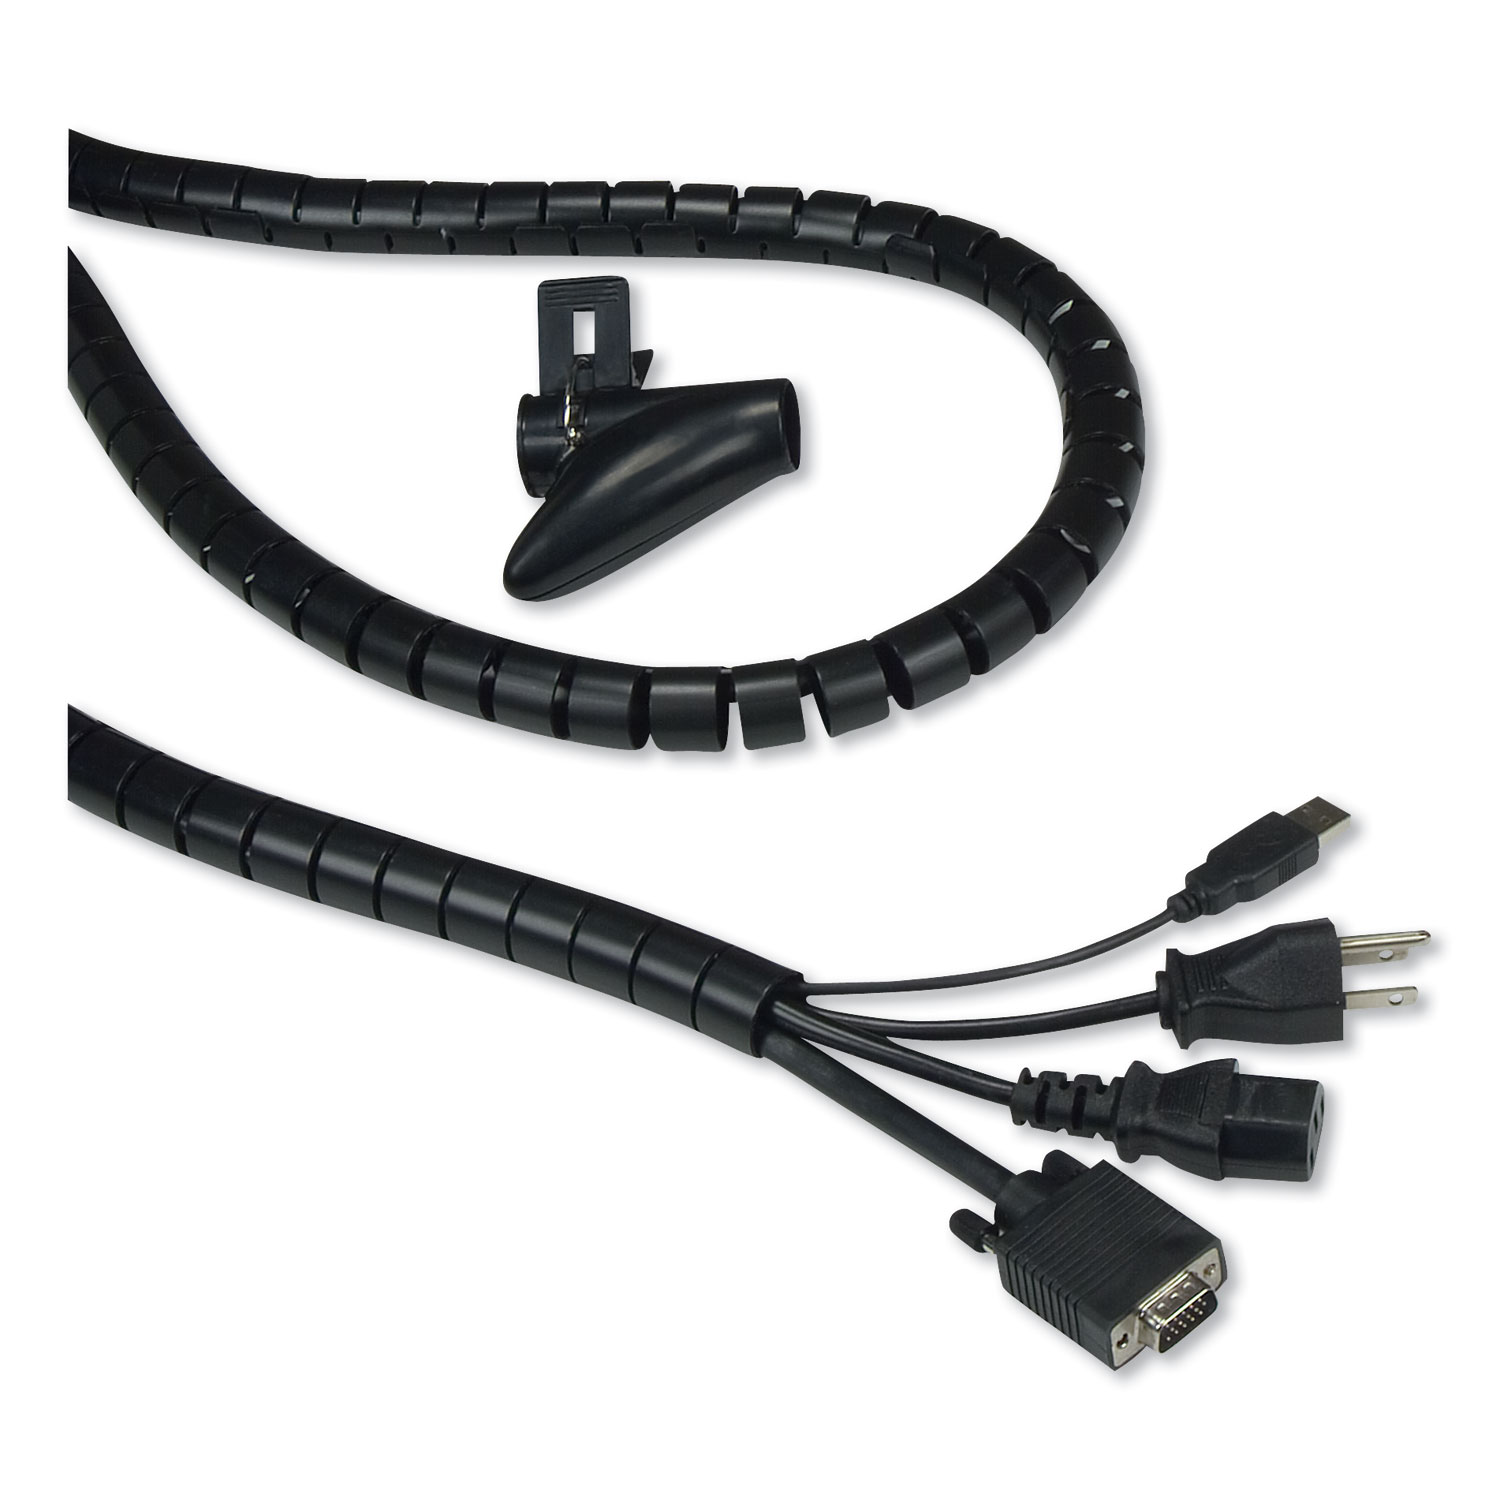  Innovera IVR39660 Cable Management Coiled Tube, 0.75 Dia x 77.5 Long, Black (IVR39660) 